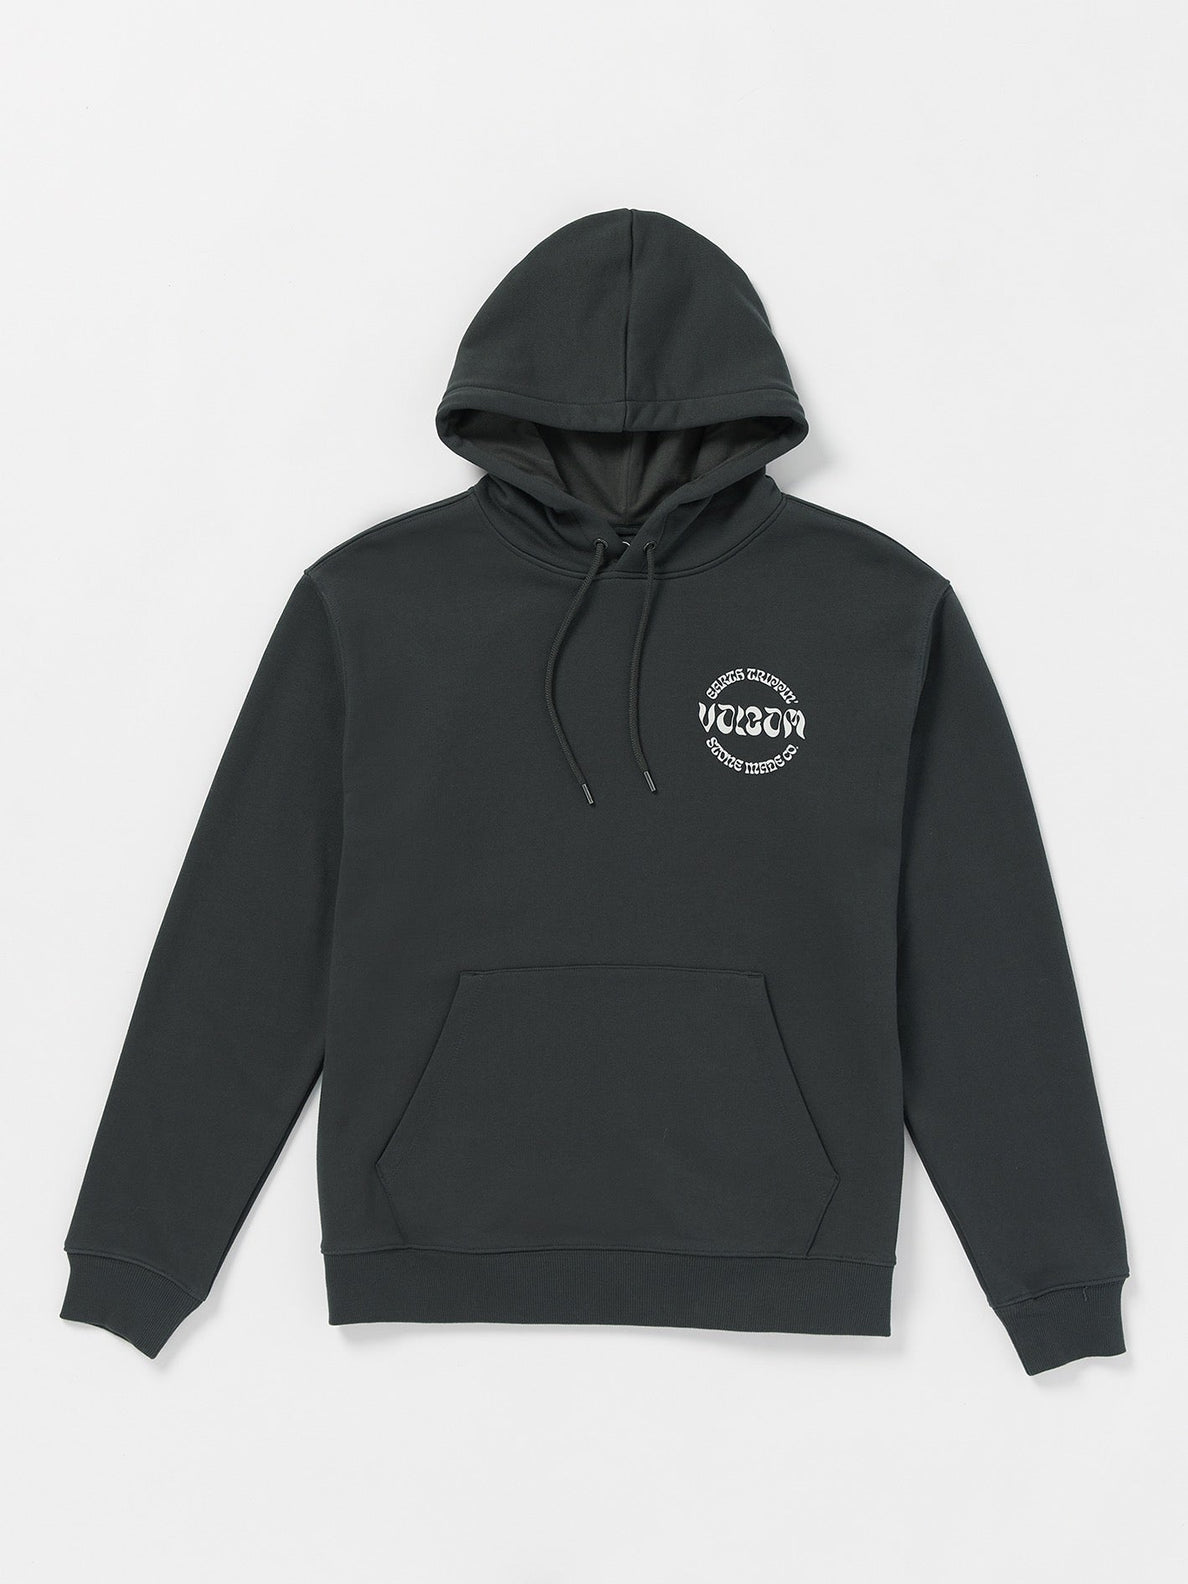 Terry Stoned Hoodie - Stealth